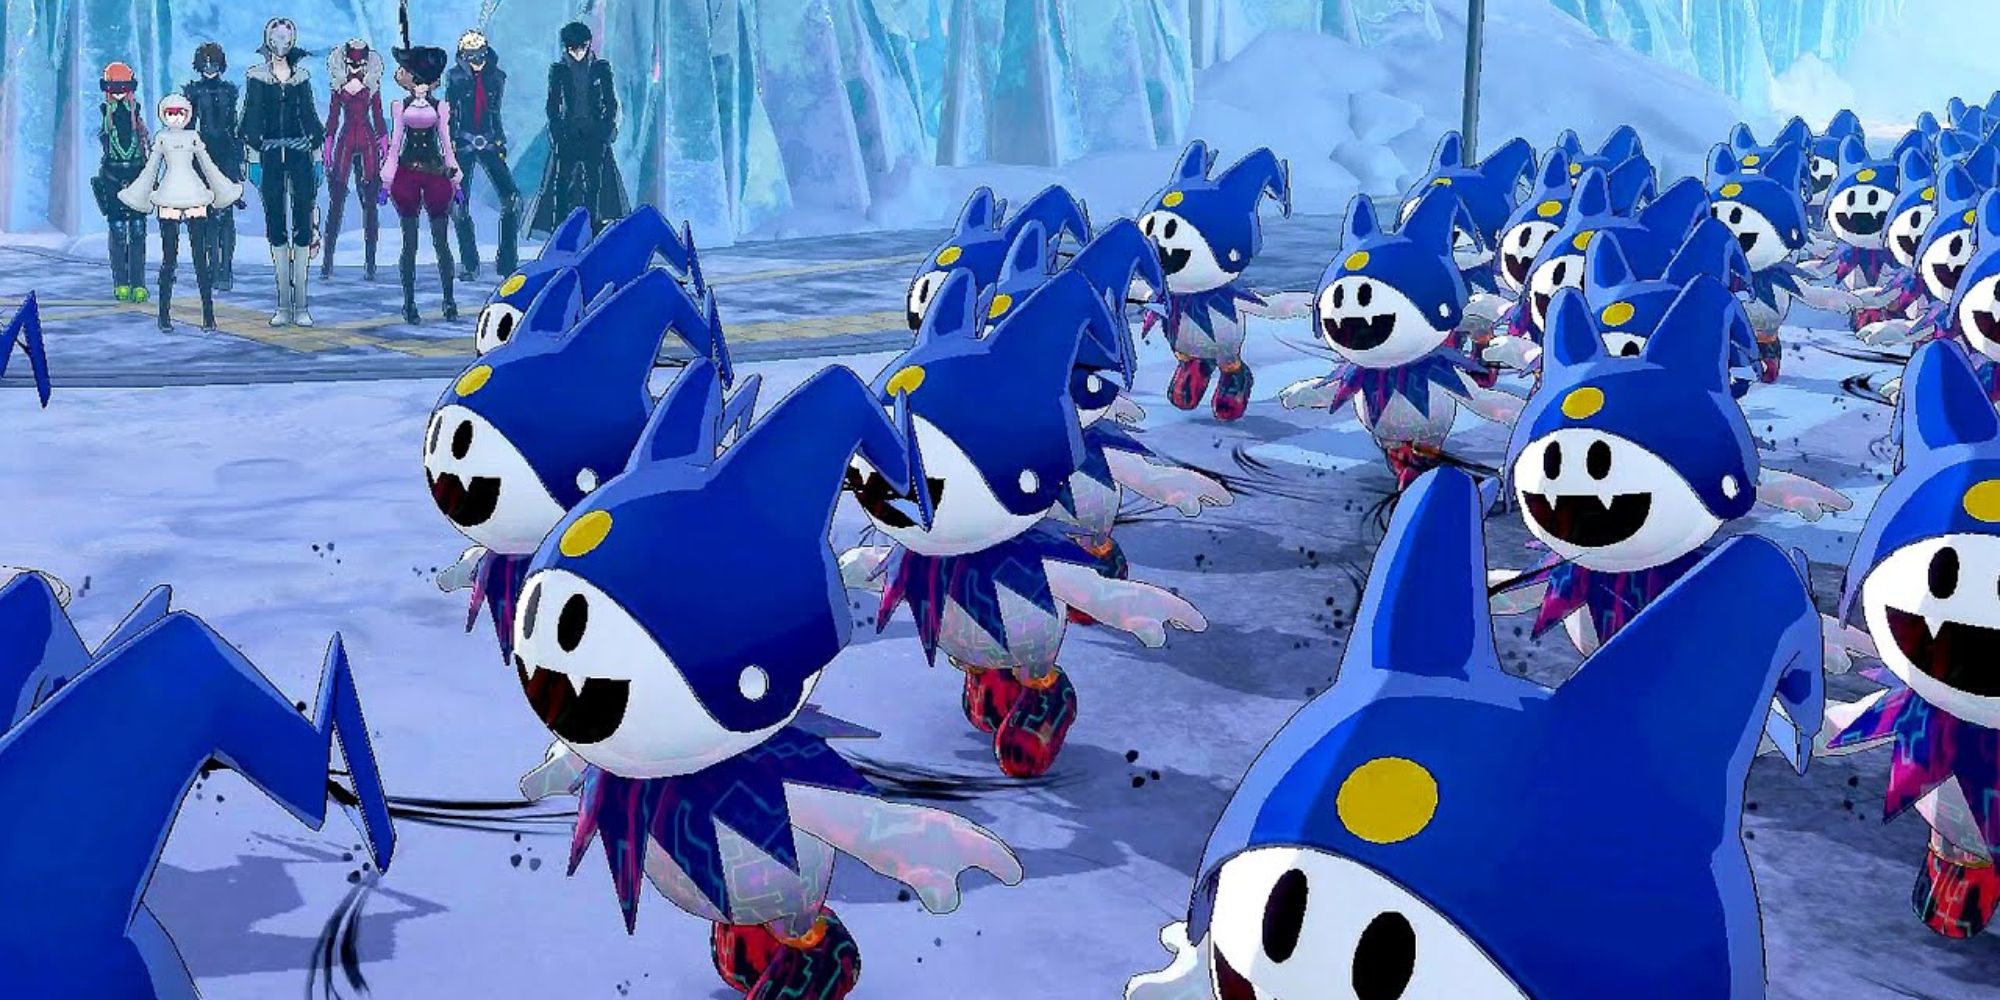 An army of Jack Frost enemies walk past the party in Persona 5 Strikers